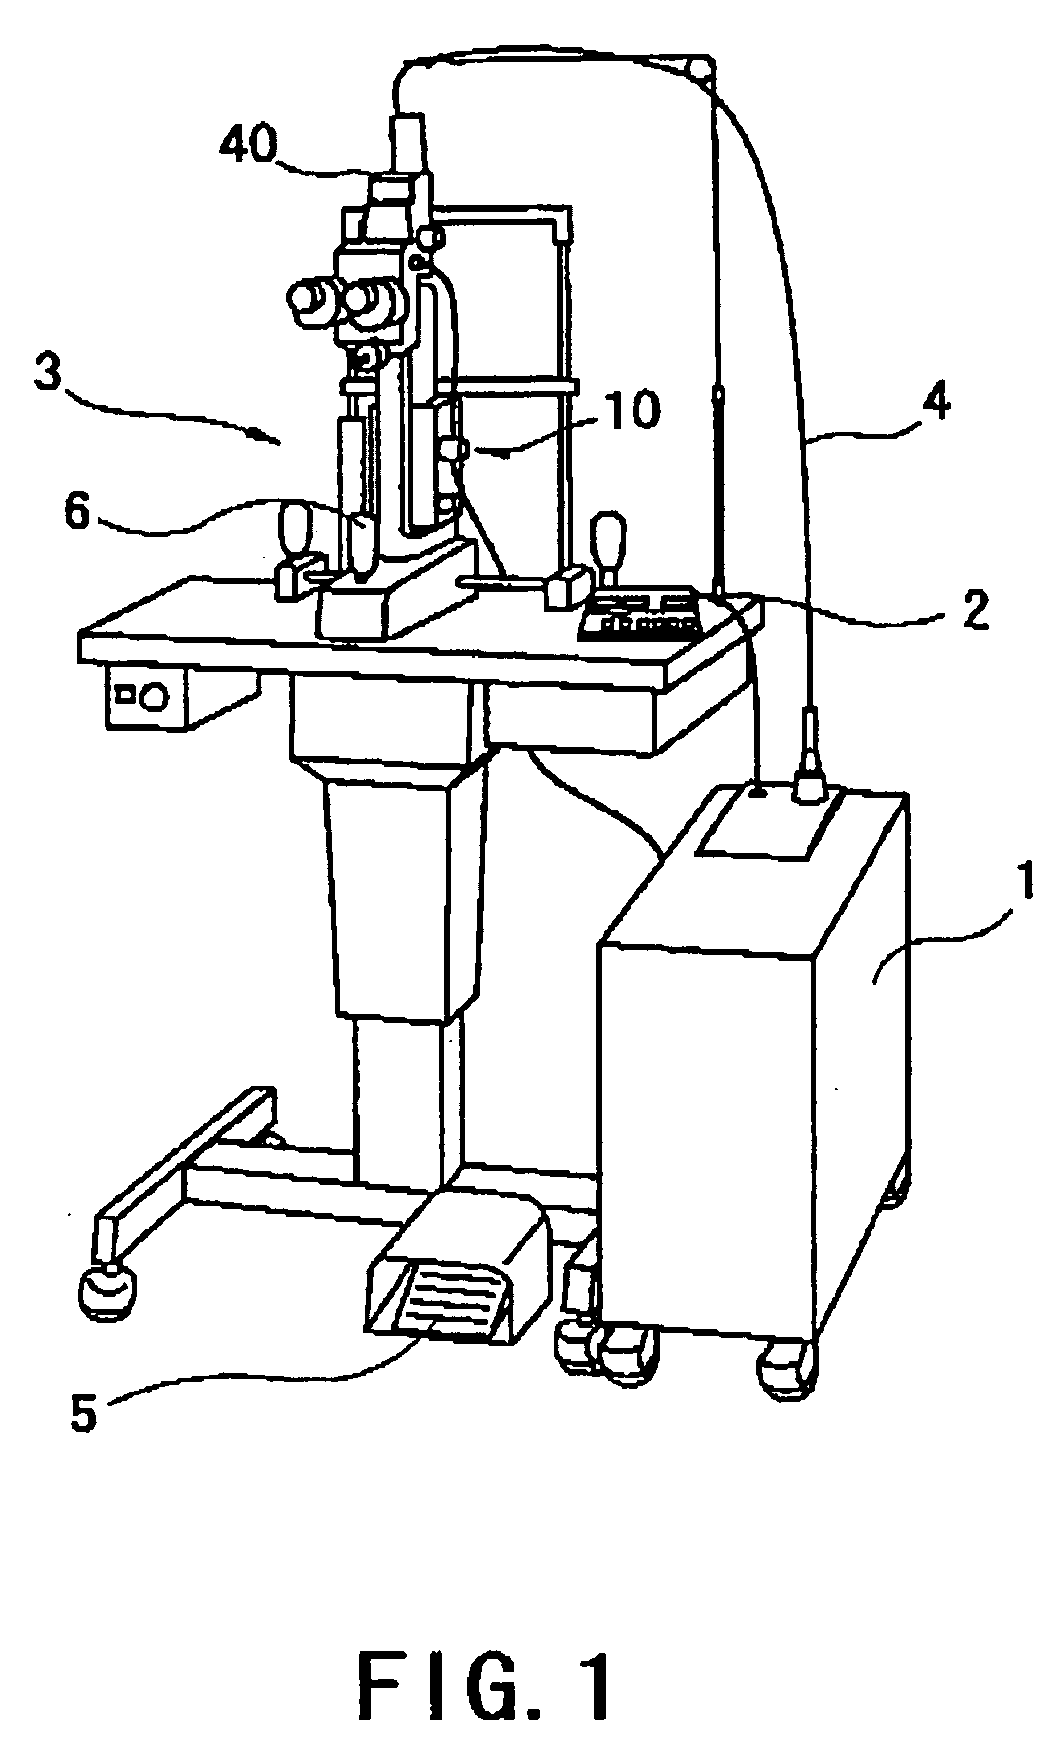 Ophthalmic laser treatment apparatus